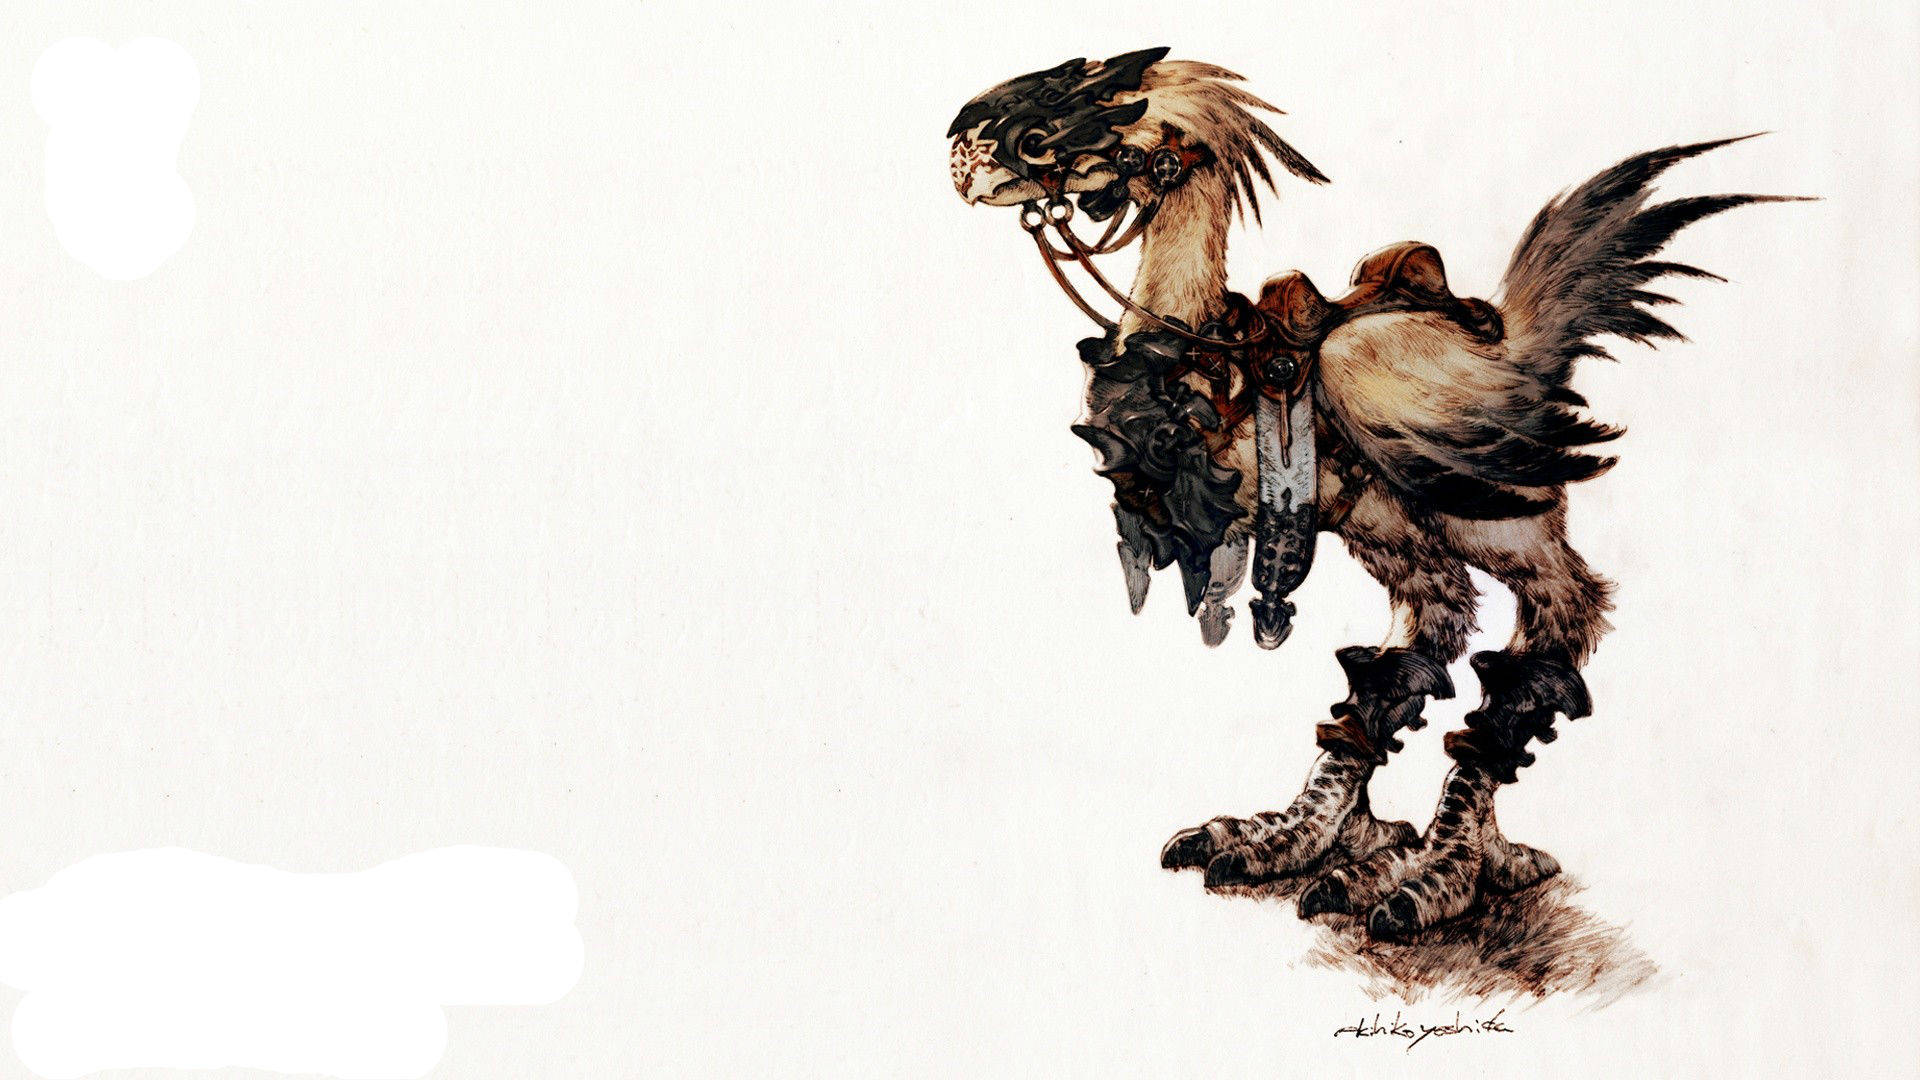 All Aboard A Chocobo For Adventure in Final Fantasy XIV Wallpaper